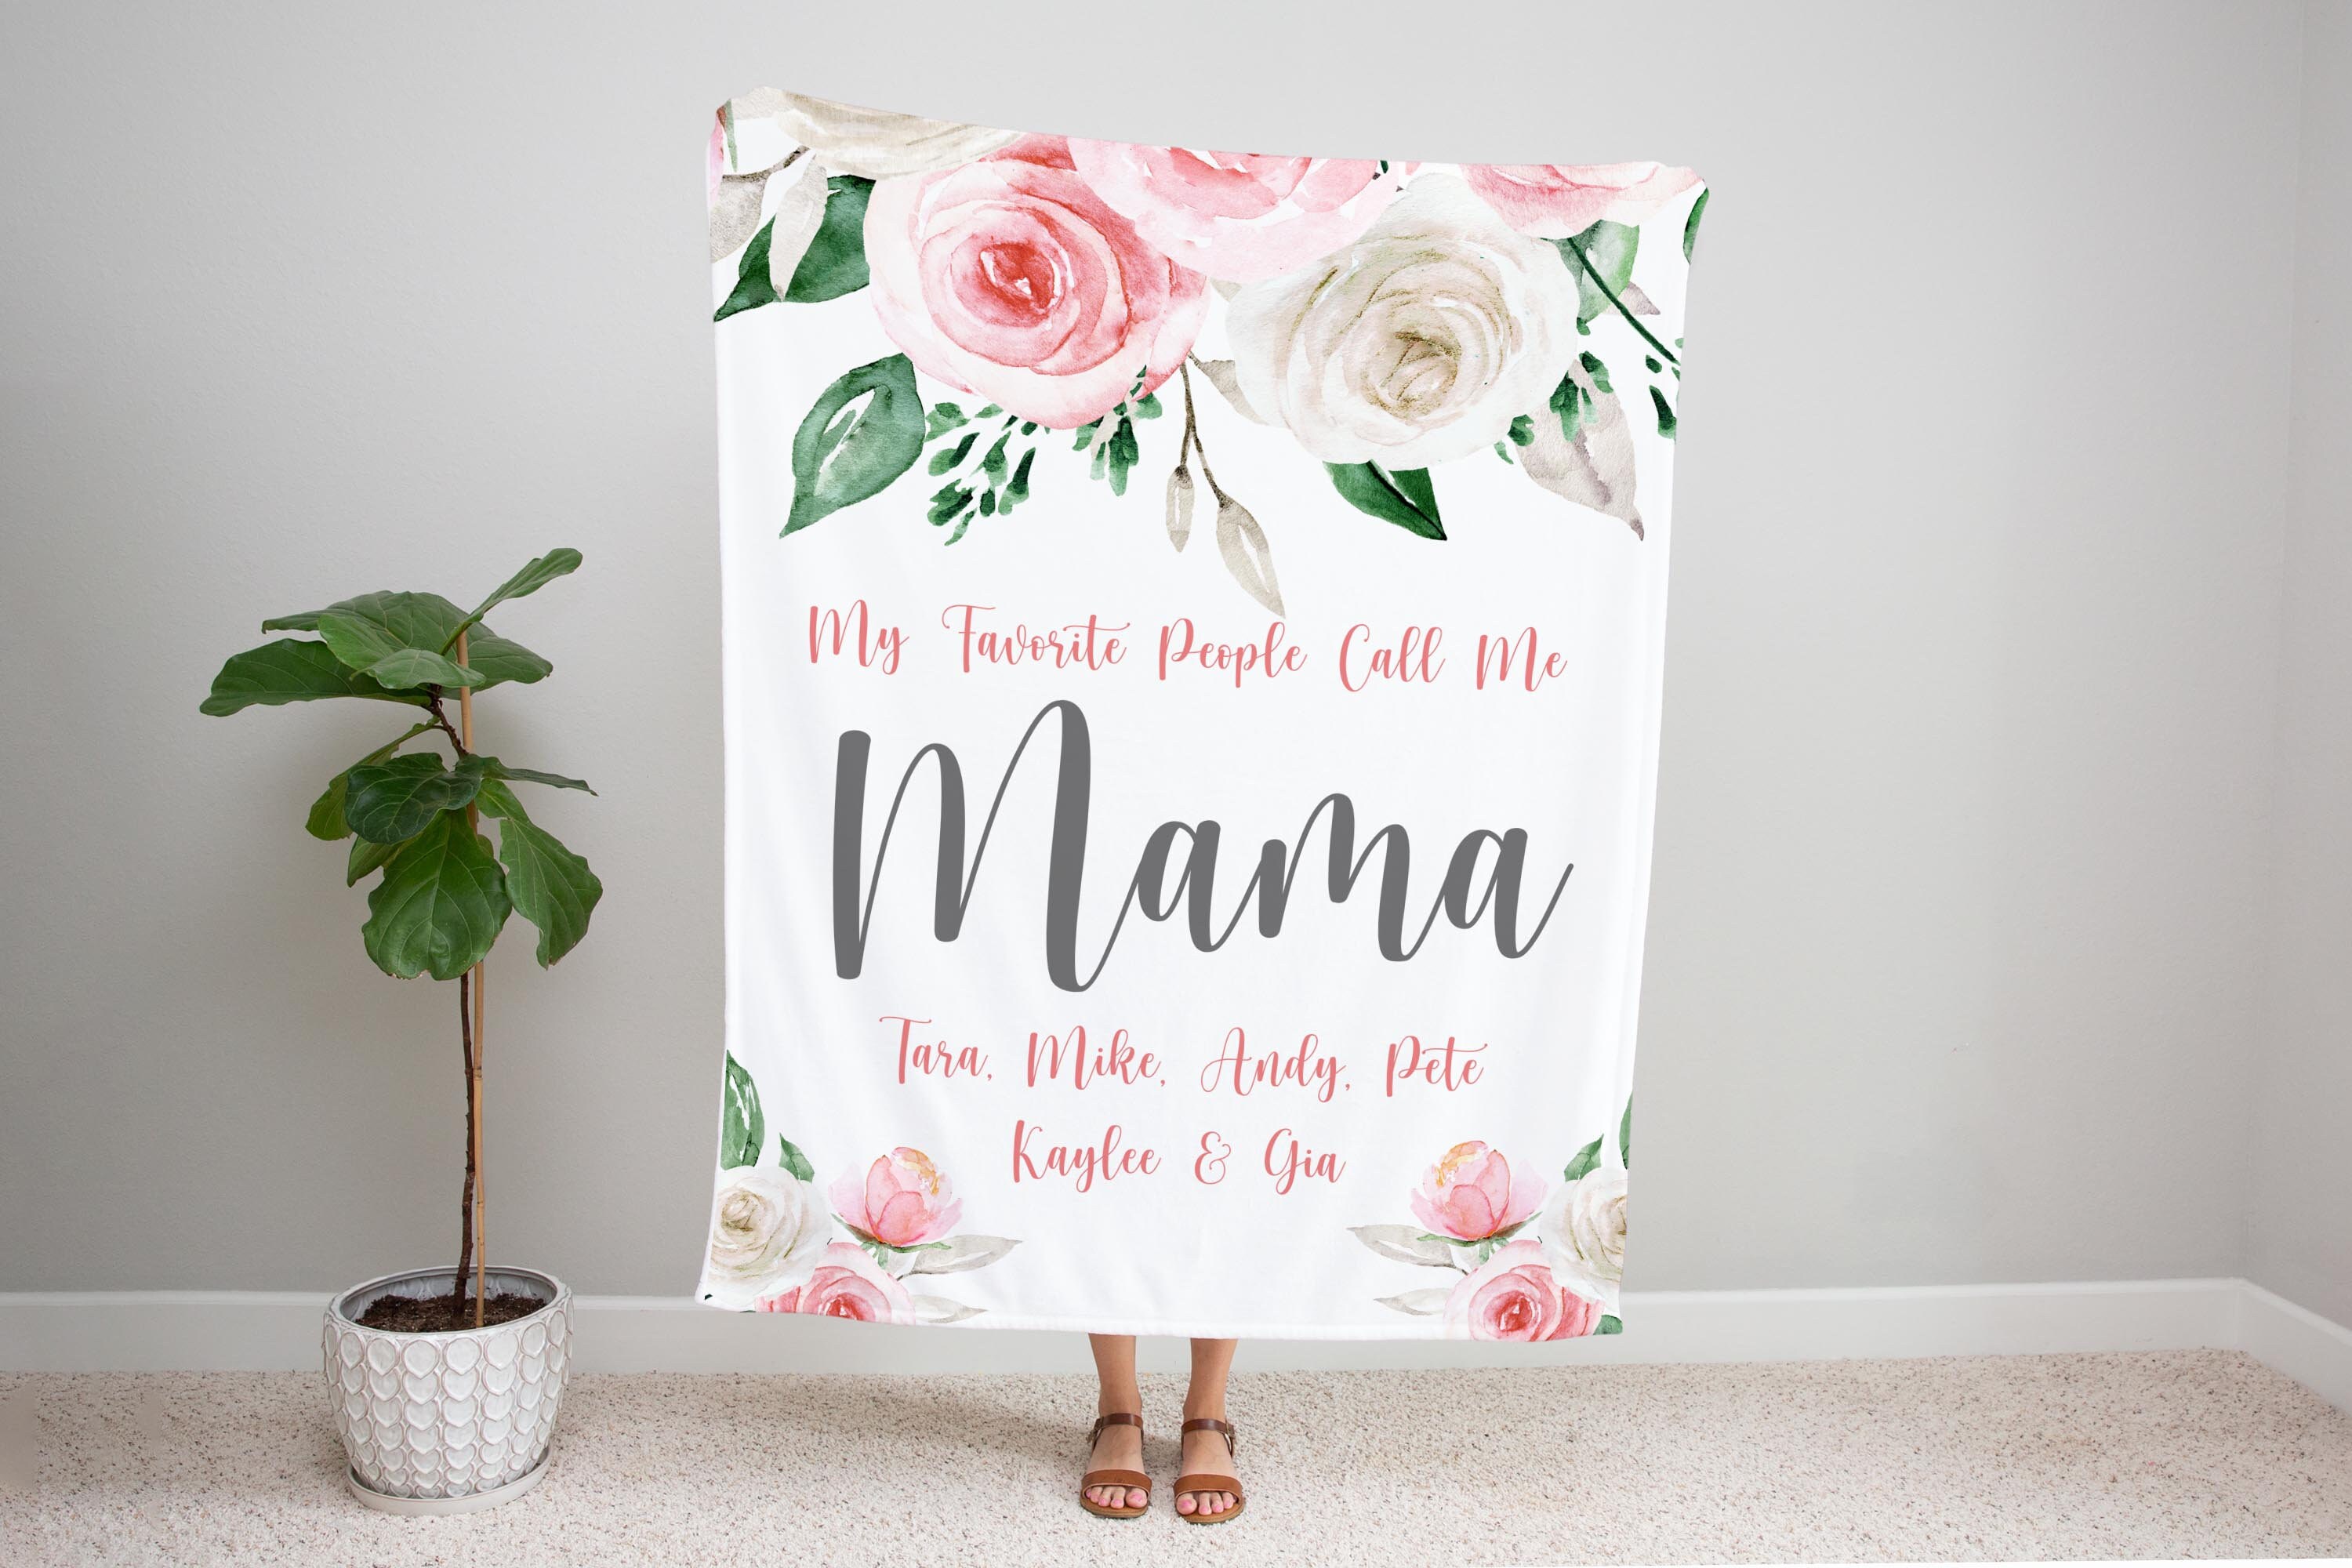 TKM Home Gifts For Mom, Christmas Birthday Gifts For Mom, Blanket